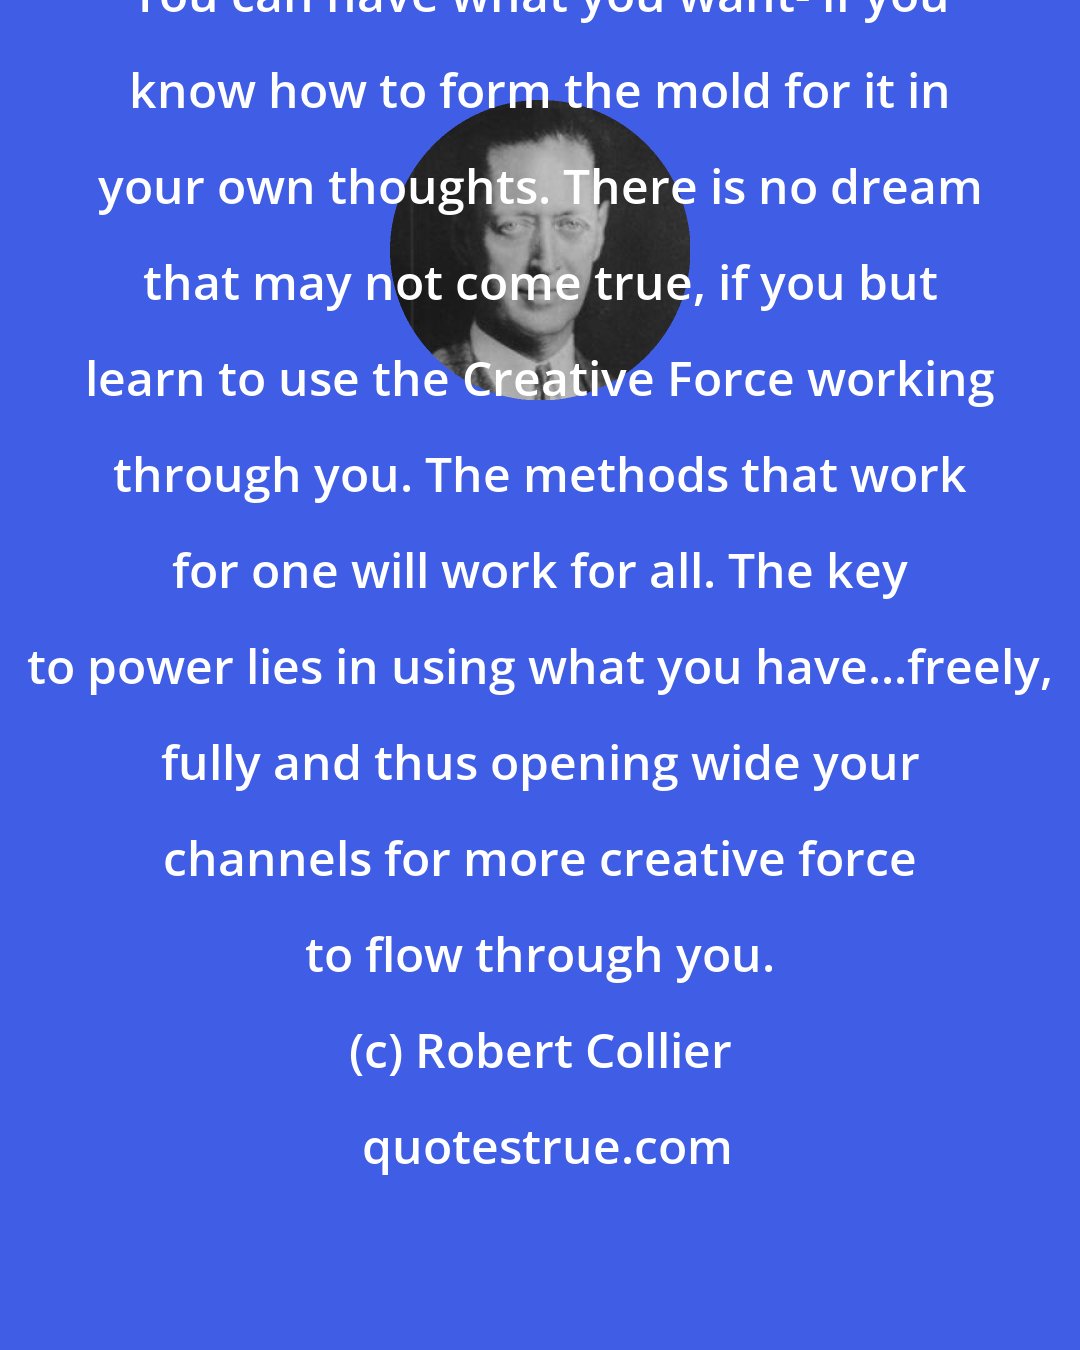 Robert Collier: You can have what you want- if you know how to form the mold for it in your own thoughts. There is no dream that may not come true, if you but learn to use the Creative Force working through you. The methods that work for one will work for all. The key to power lies in using what you have...freely, fully and thus opening wide your channels for more creative force to flow through you.